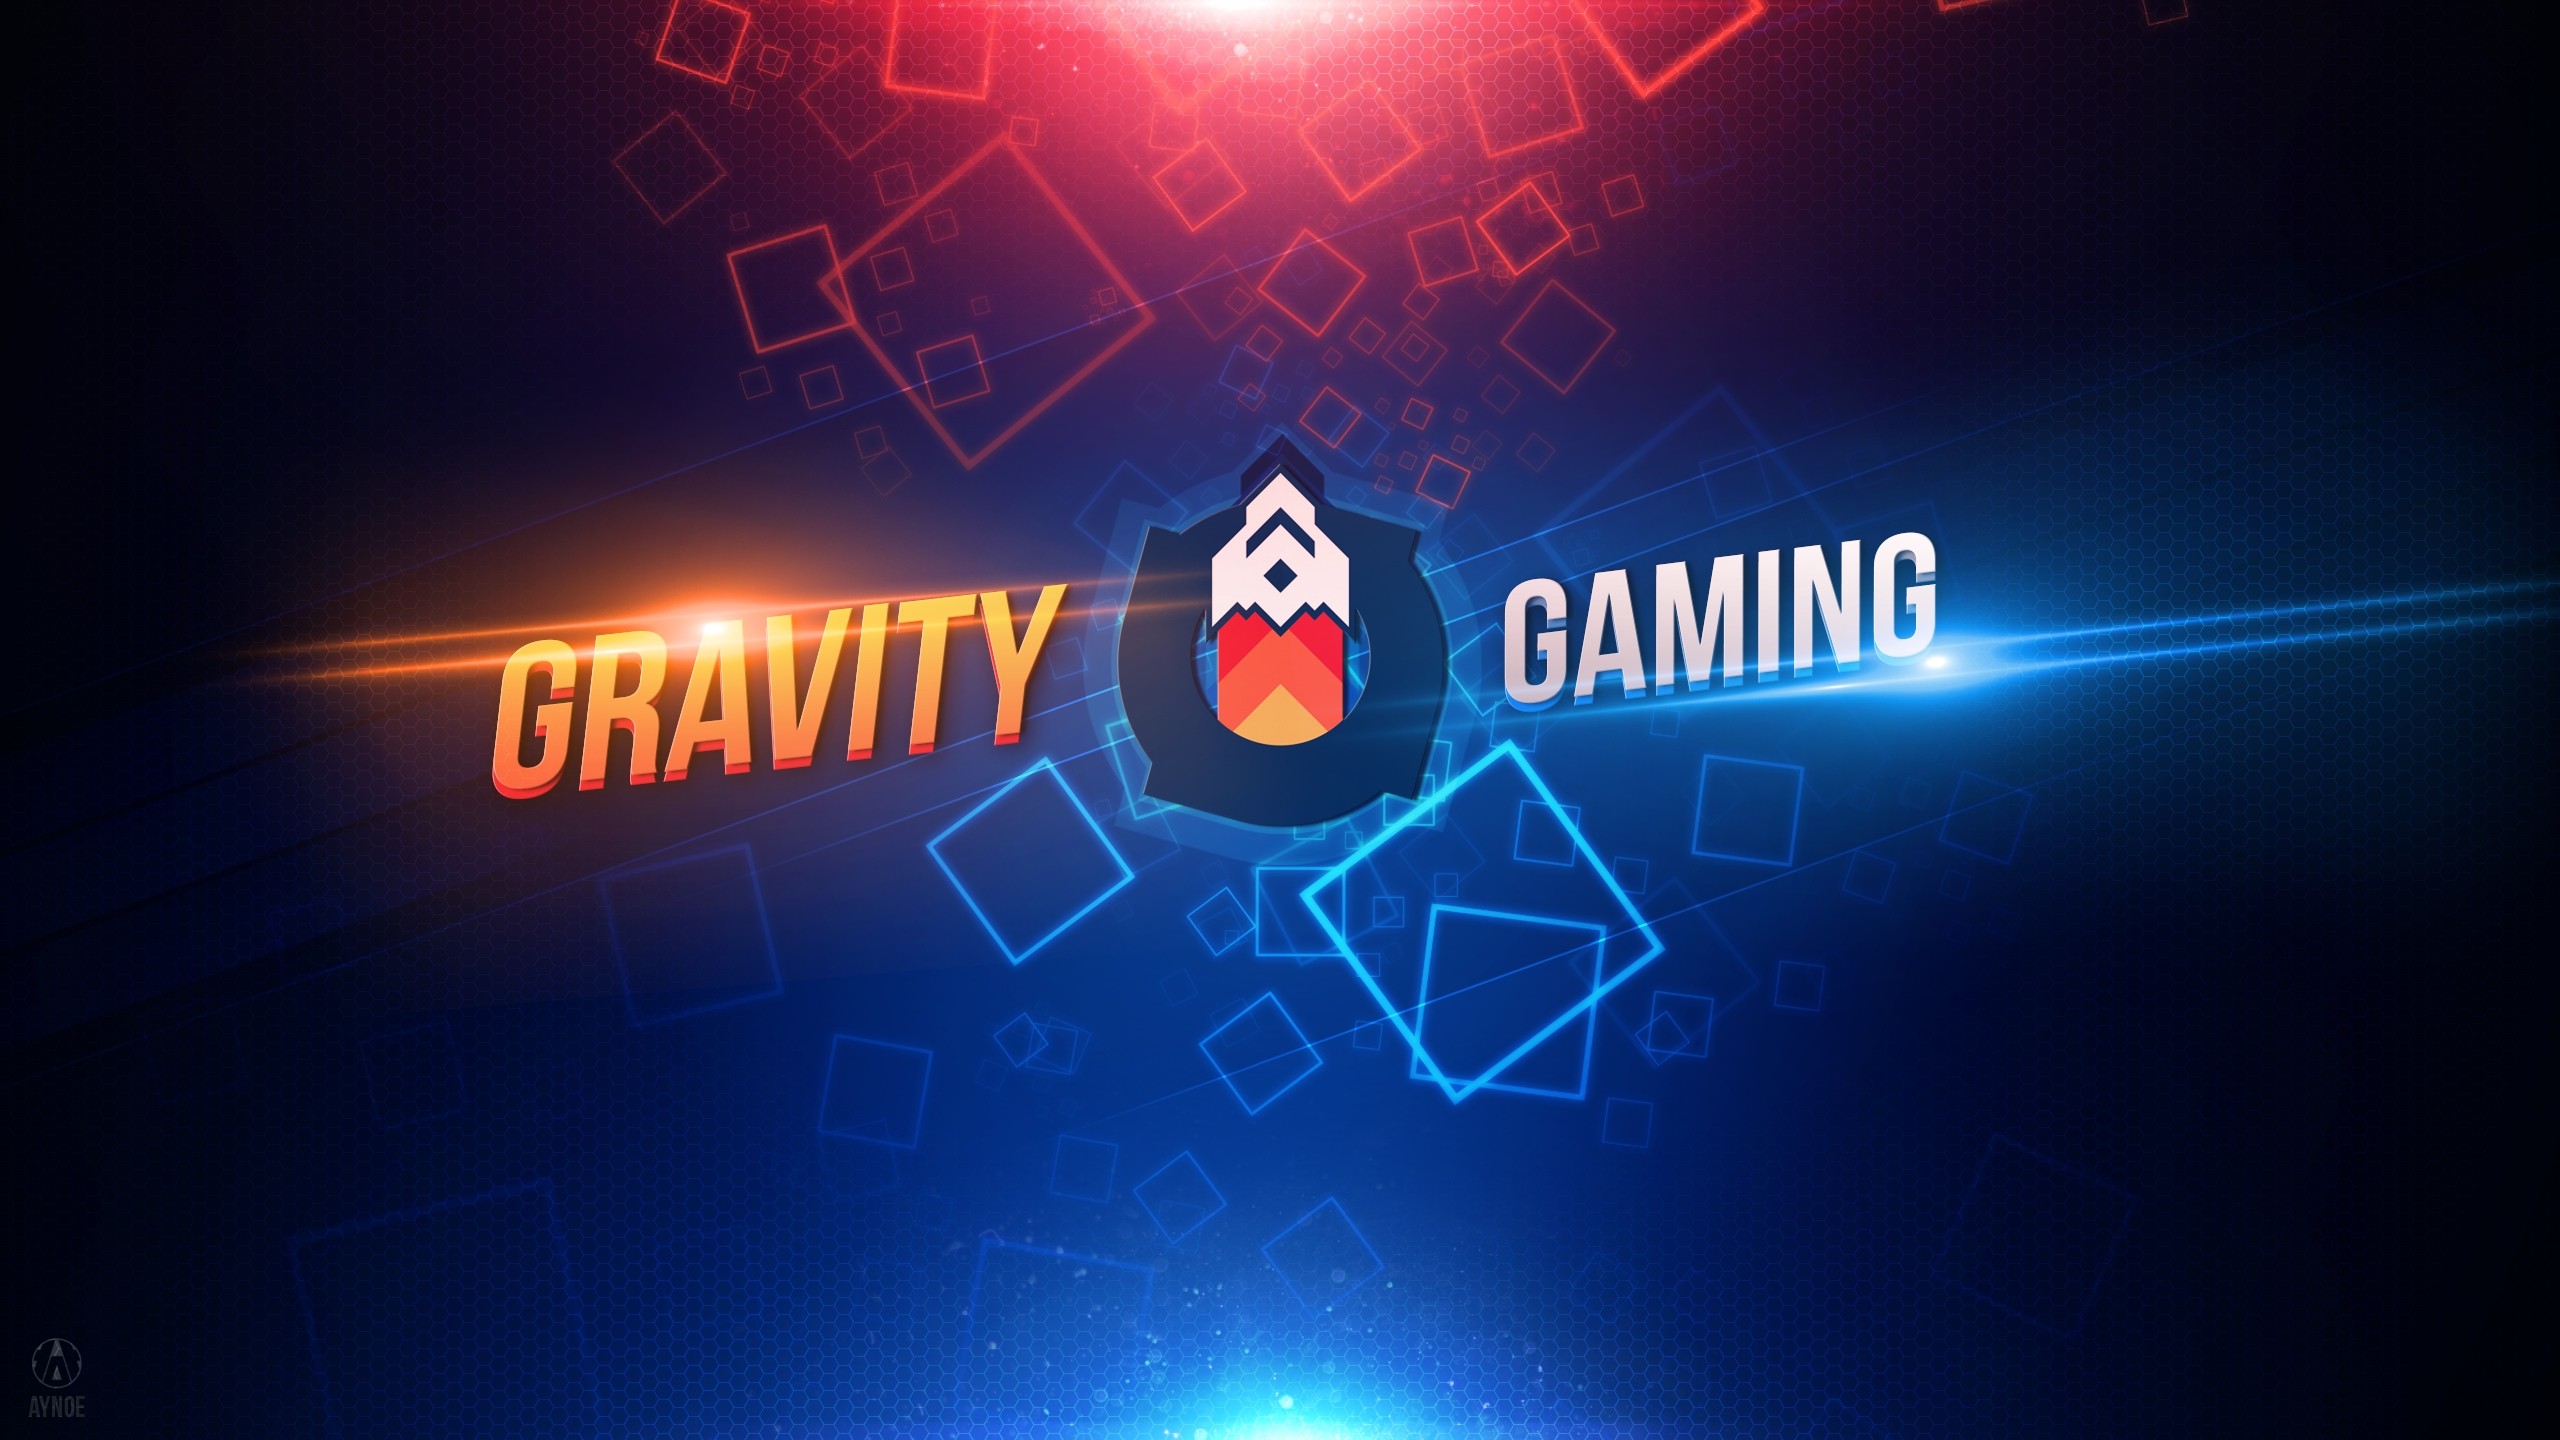 2560x1440 Gravity-gaming-wallpapers-logo-league-of-legends-001